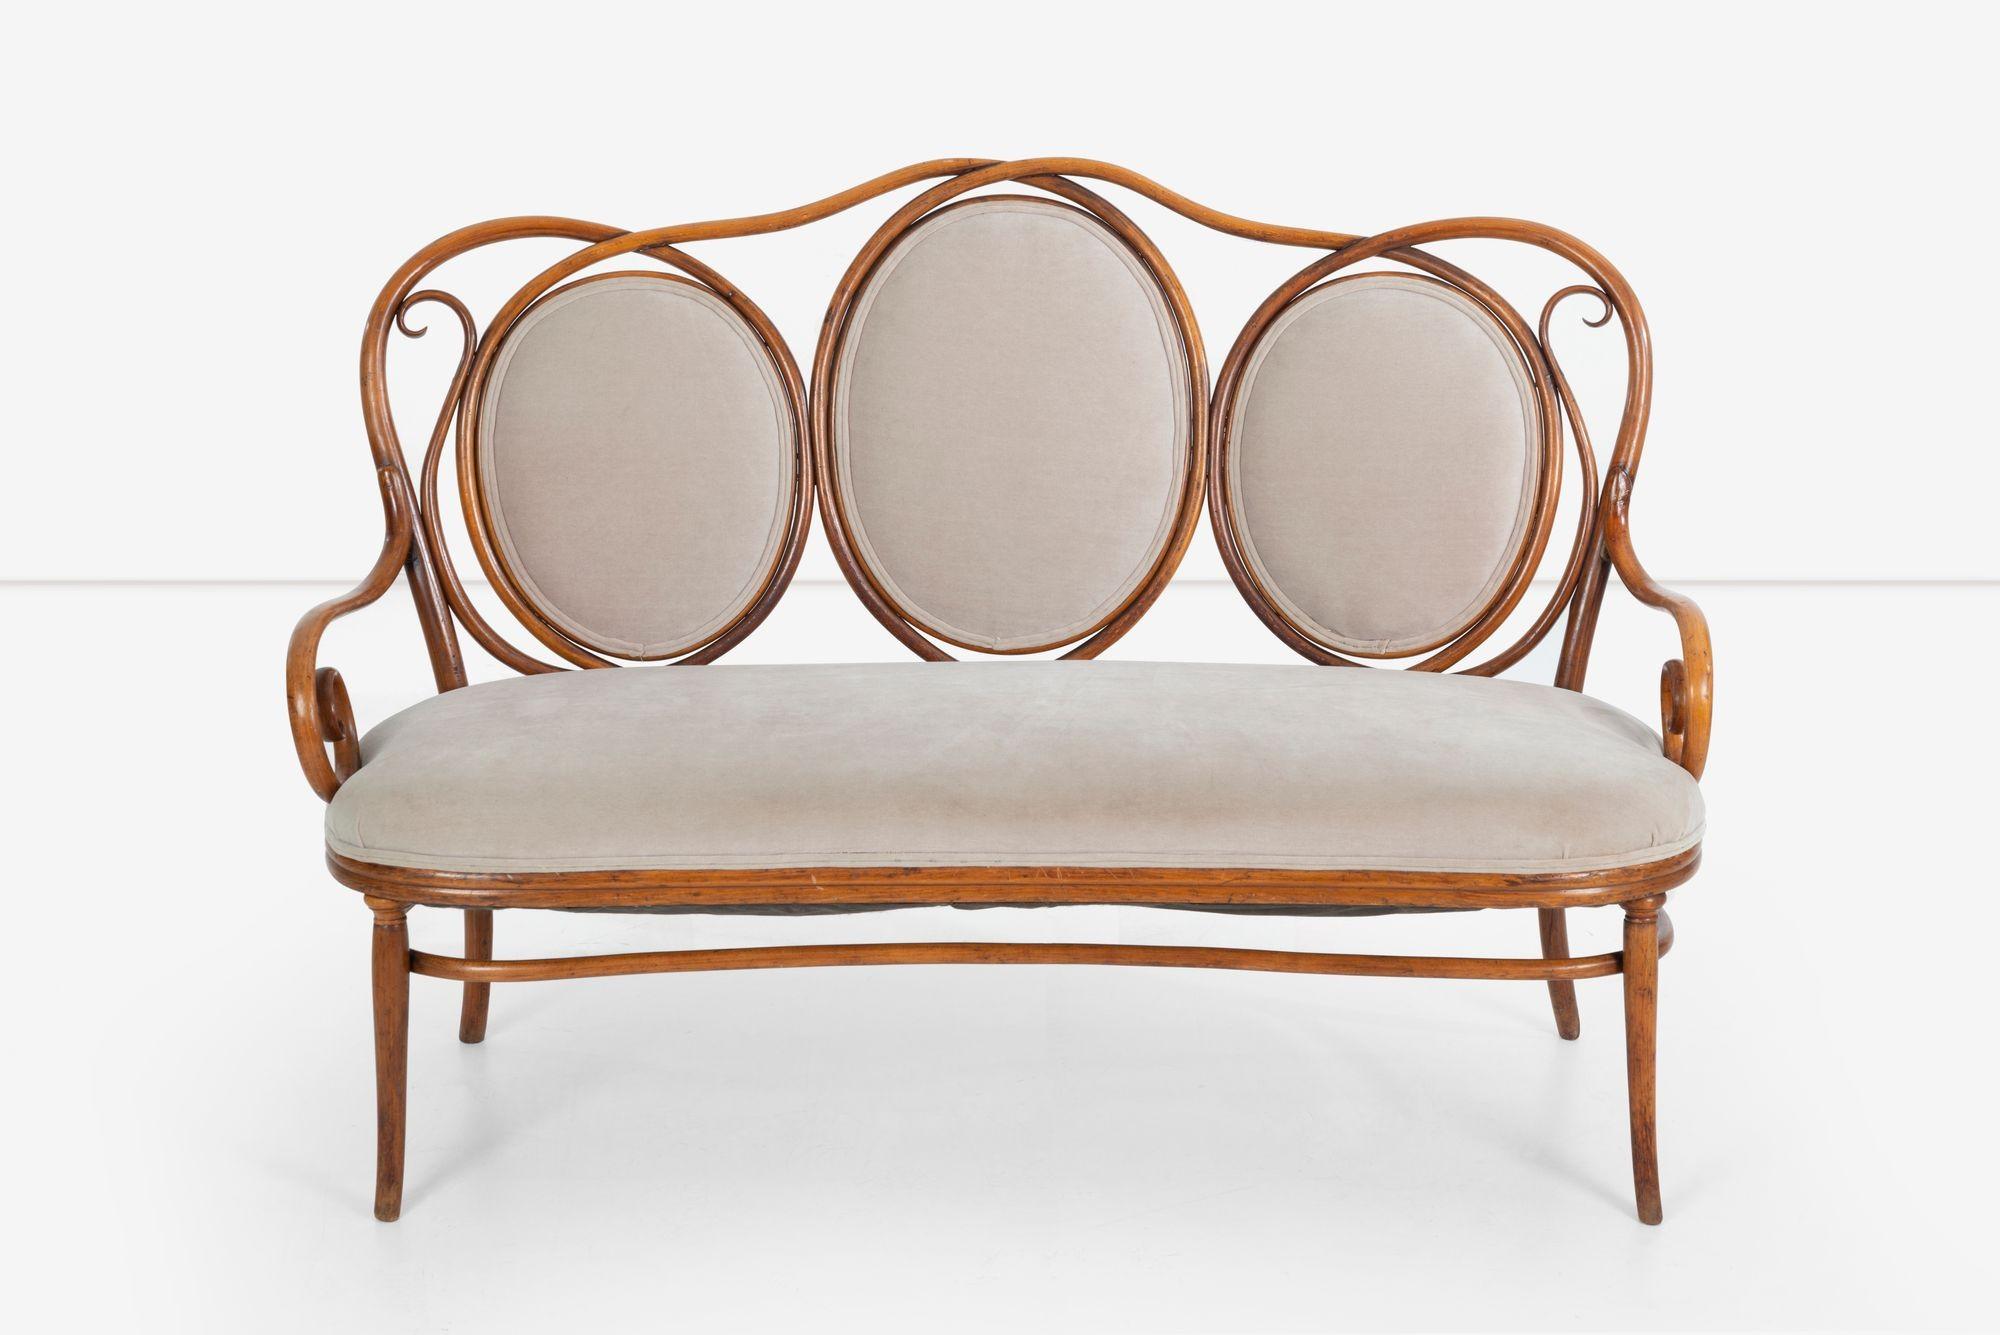 Michael Thonet sofa bench Kanapee Sittee NR22 First original form, produced 1889-1890
Cane replaced with mohair
 
Seat Height: 20.5